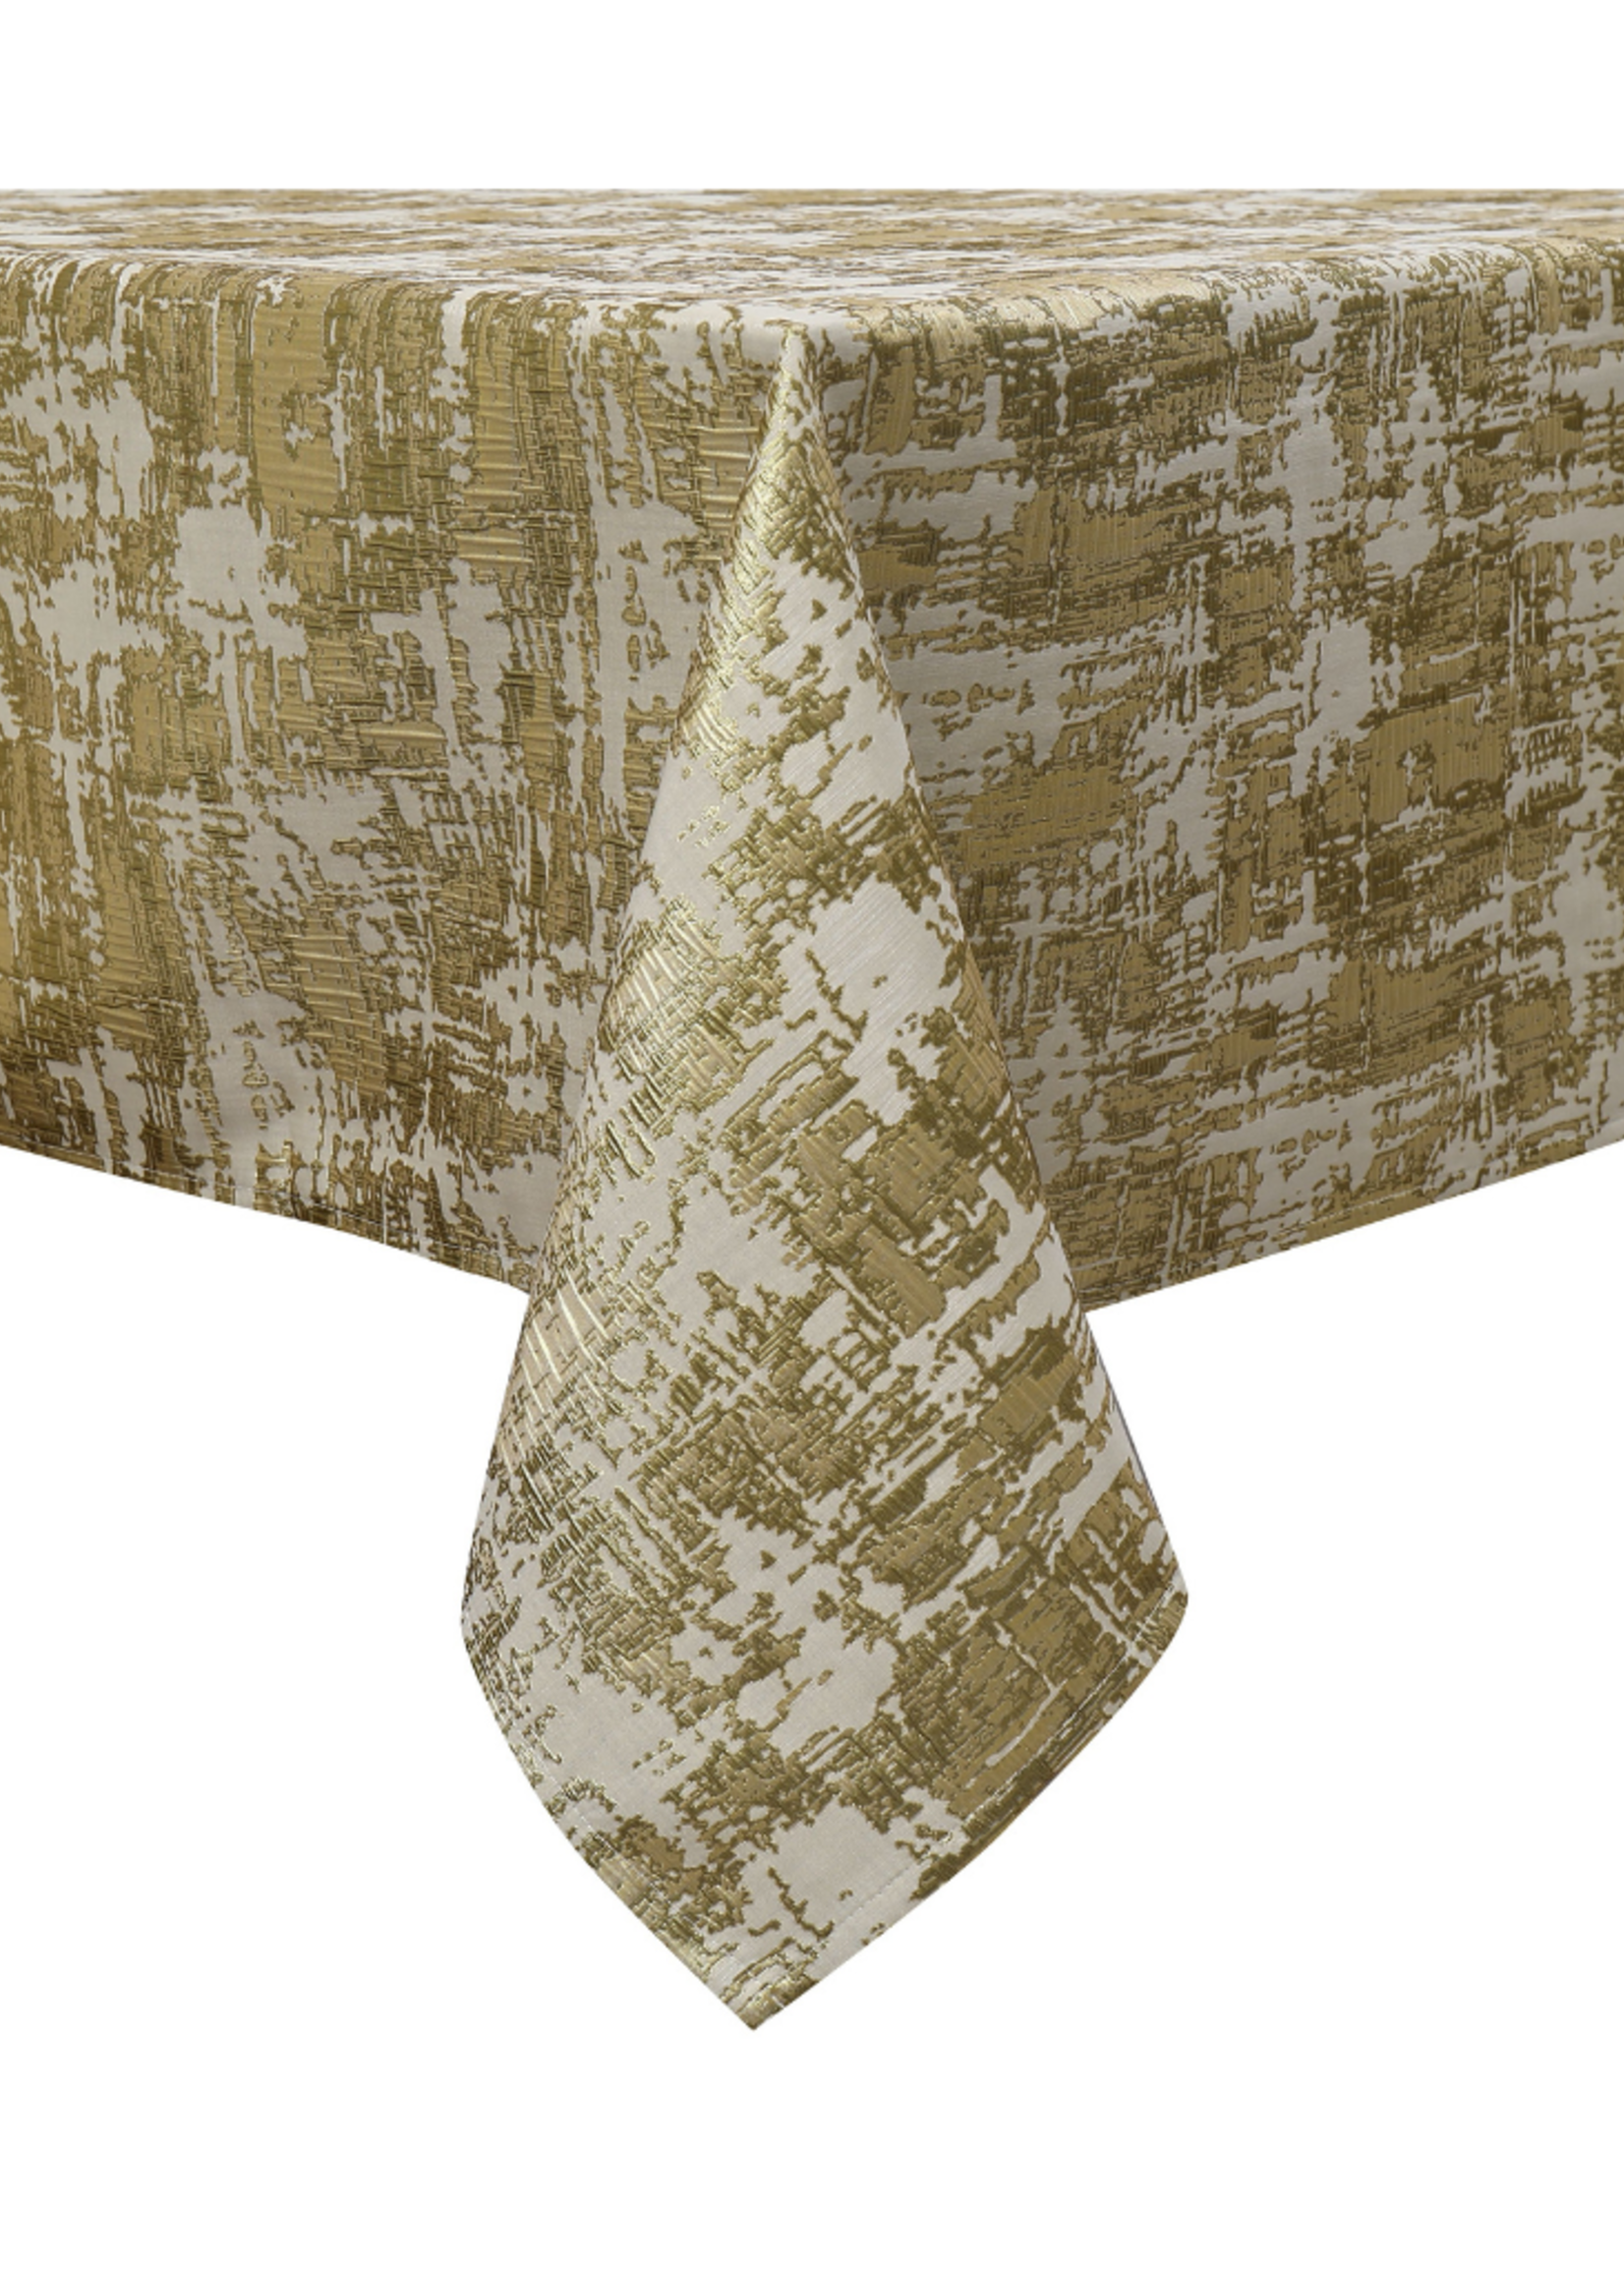 Jacquard Tablecloth Abstract Beige/Gold #1224